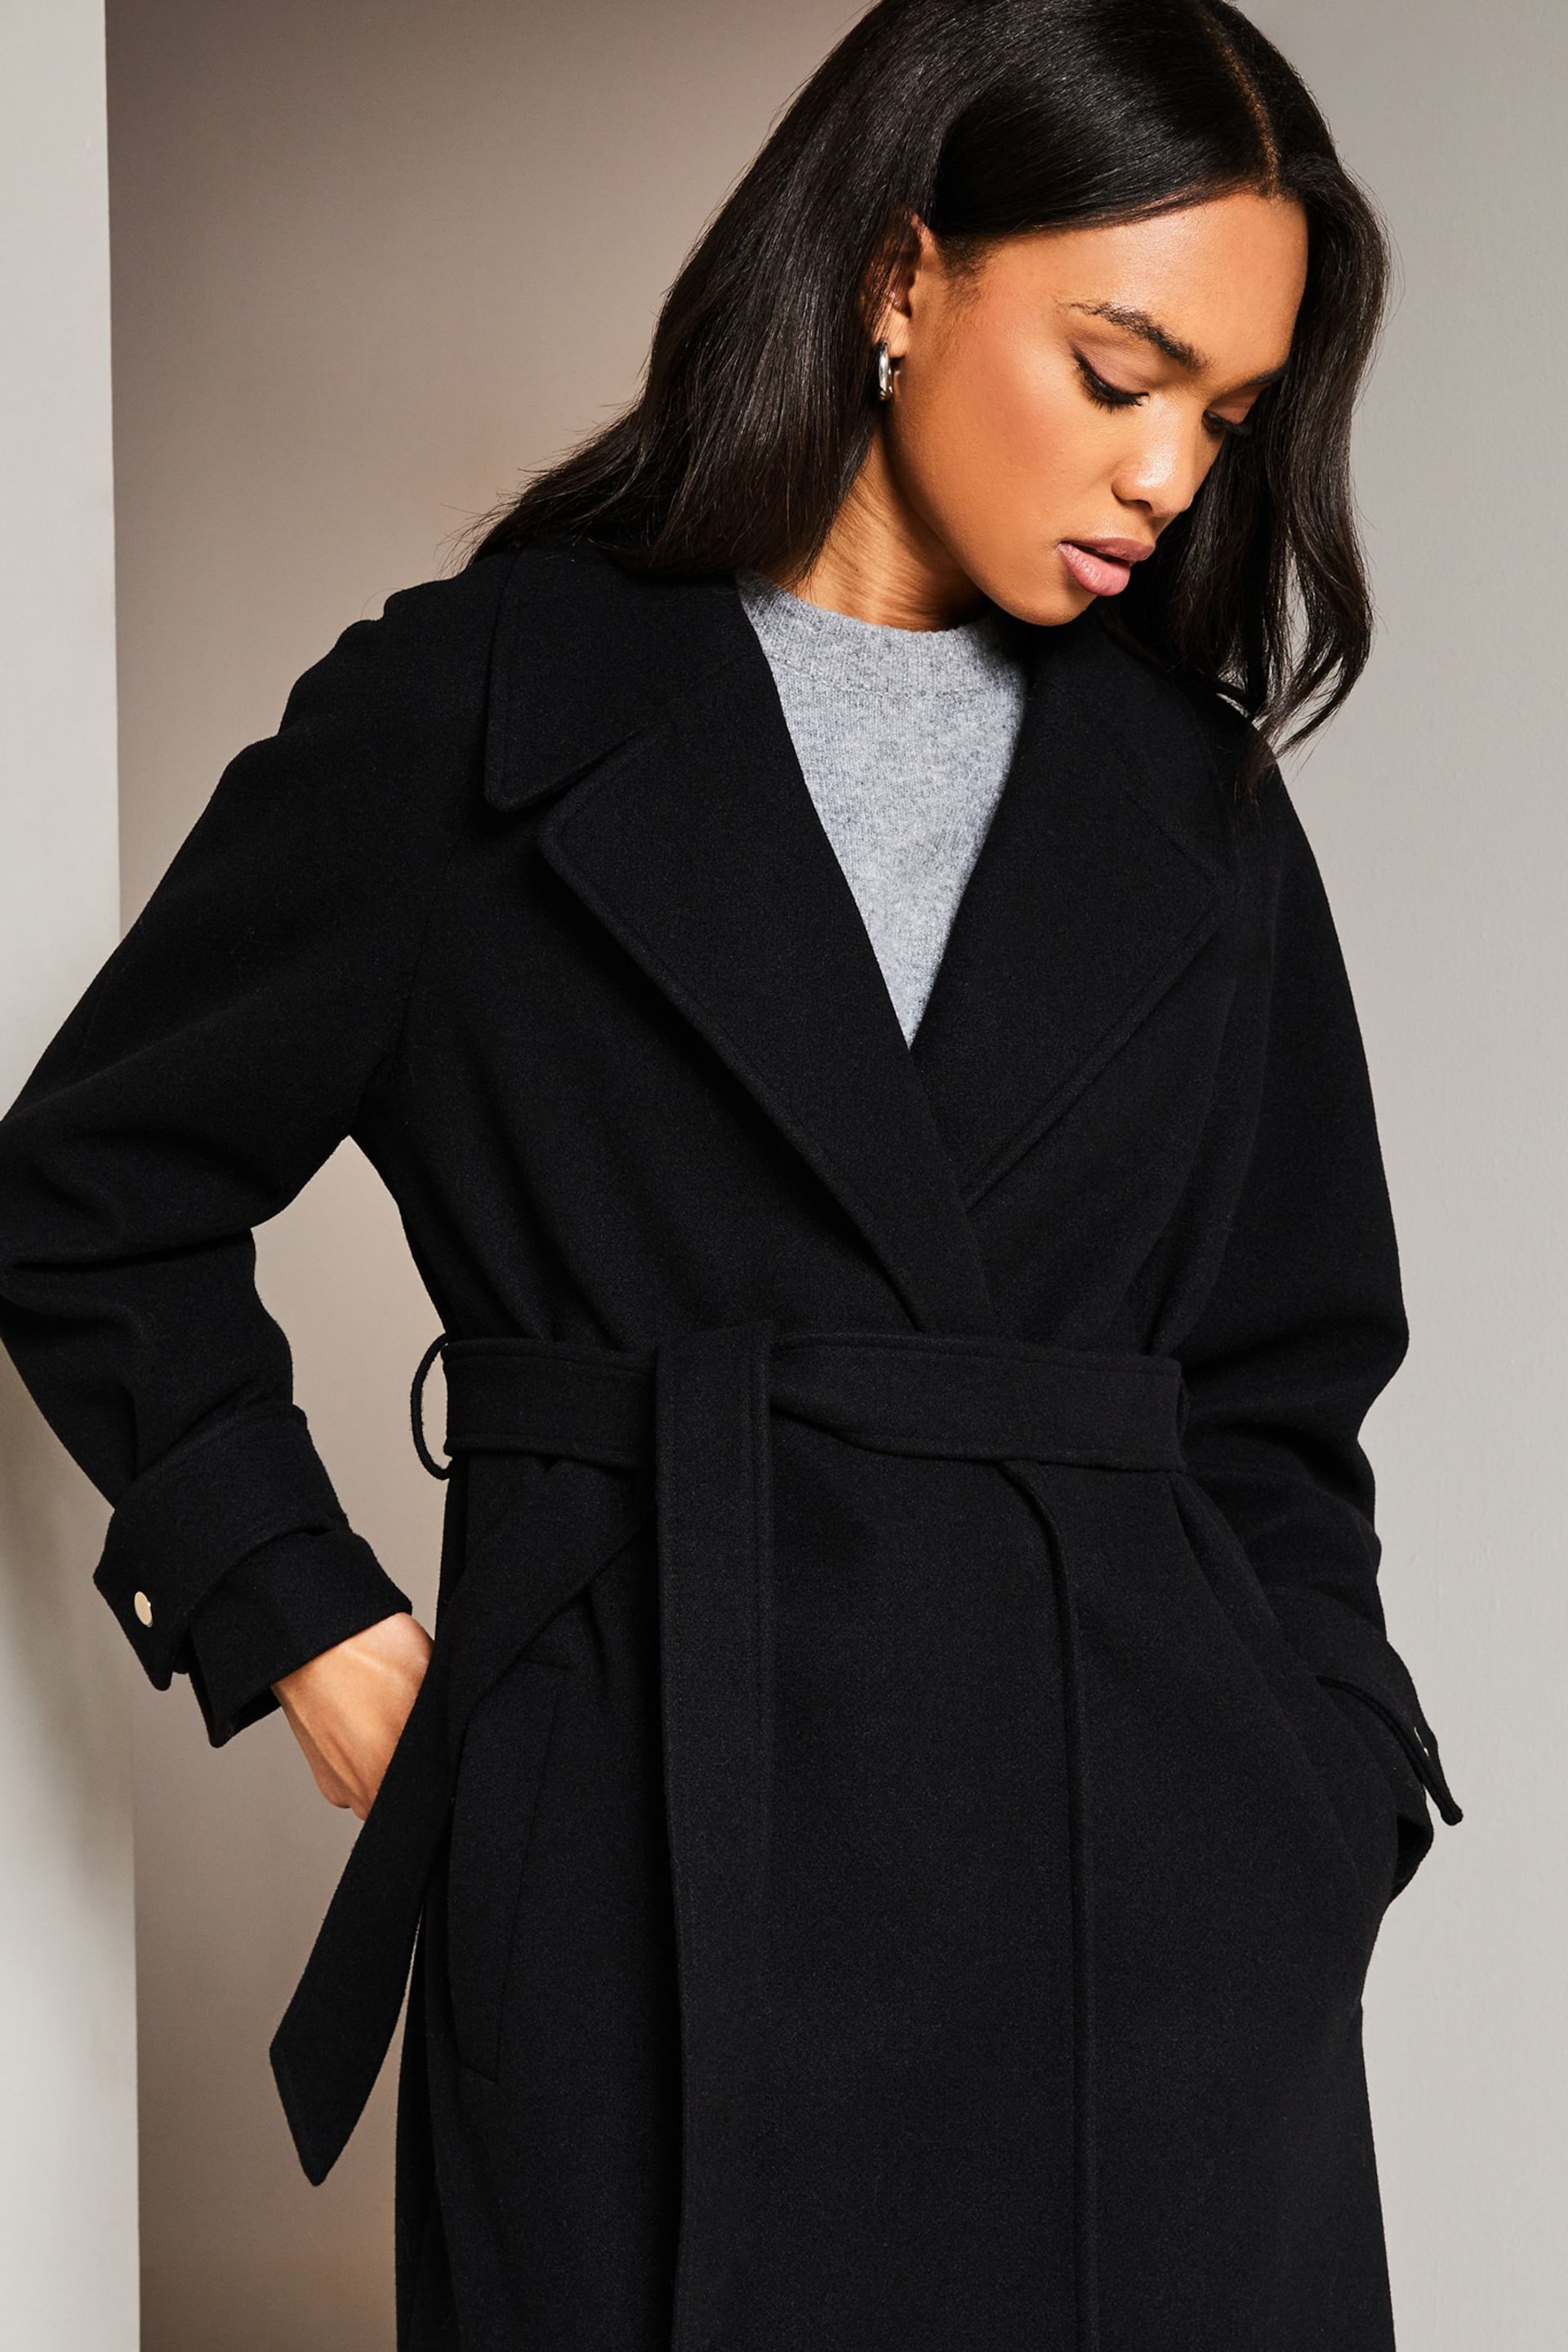 Lipsy Black Belted Smart Wrap Trench Coat - Image 4 of 5